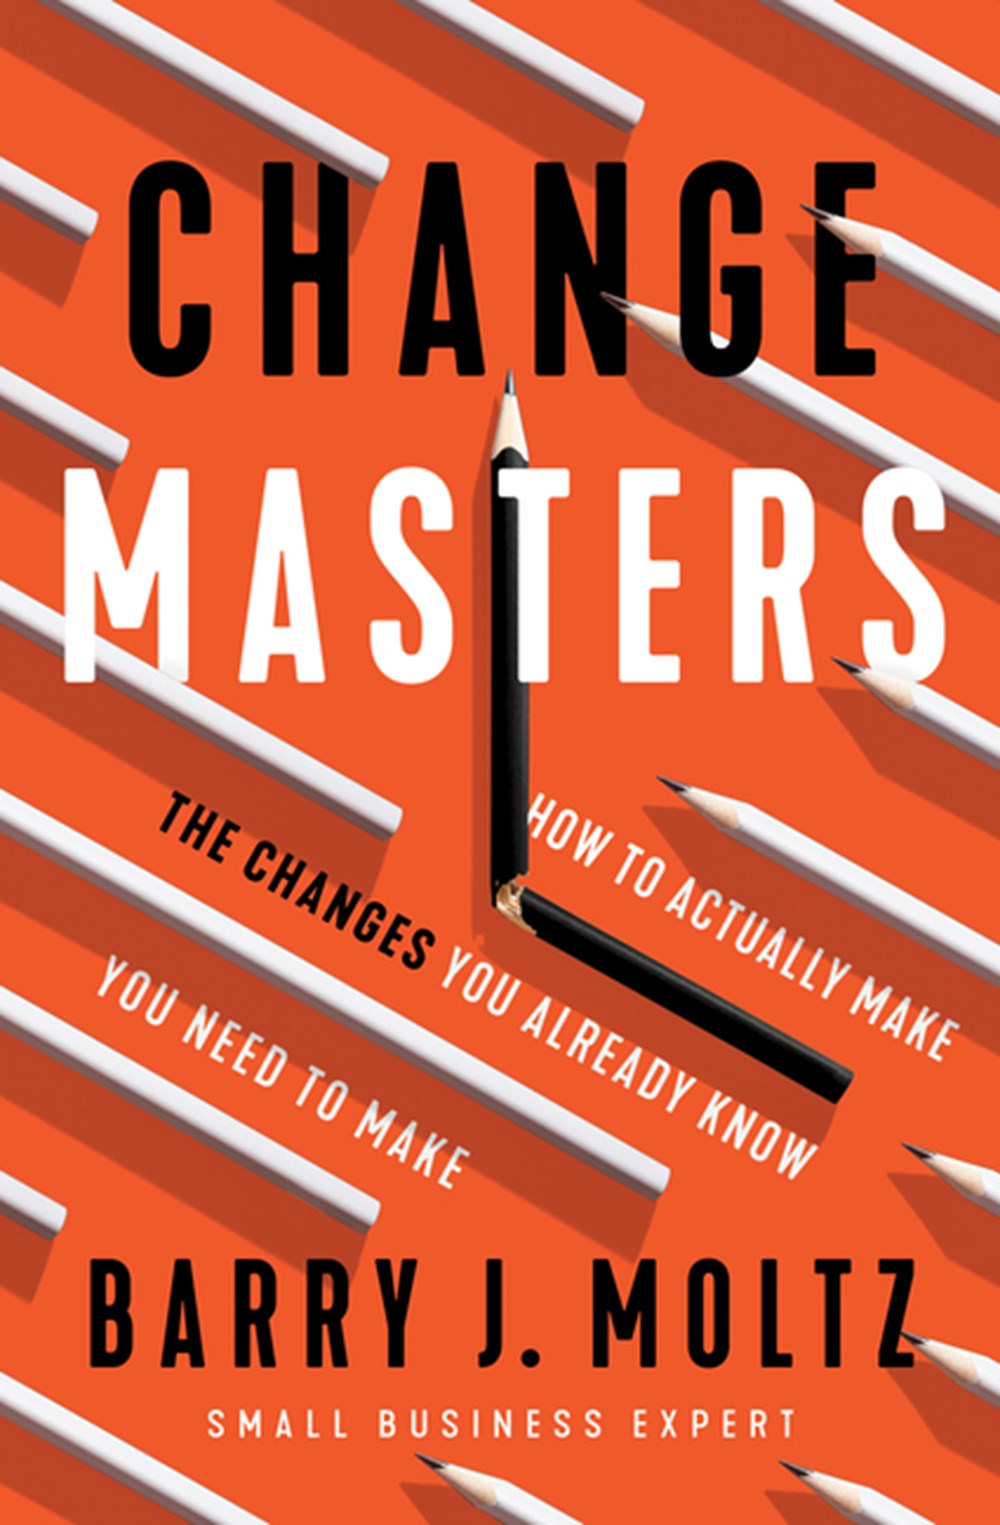 Changemasters How to Actually Make the Changes You Already Know You Need to Make